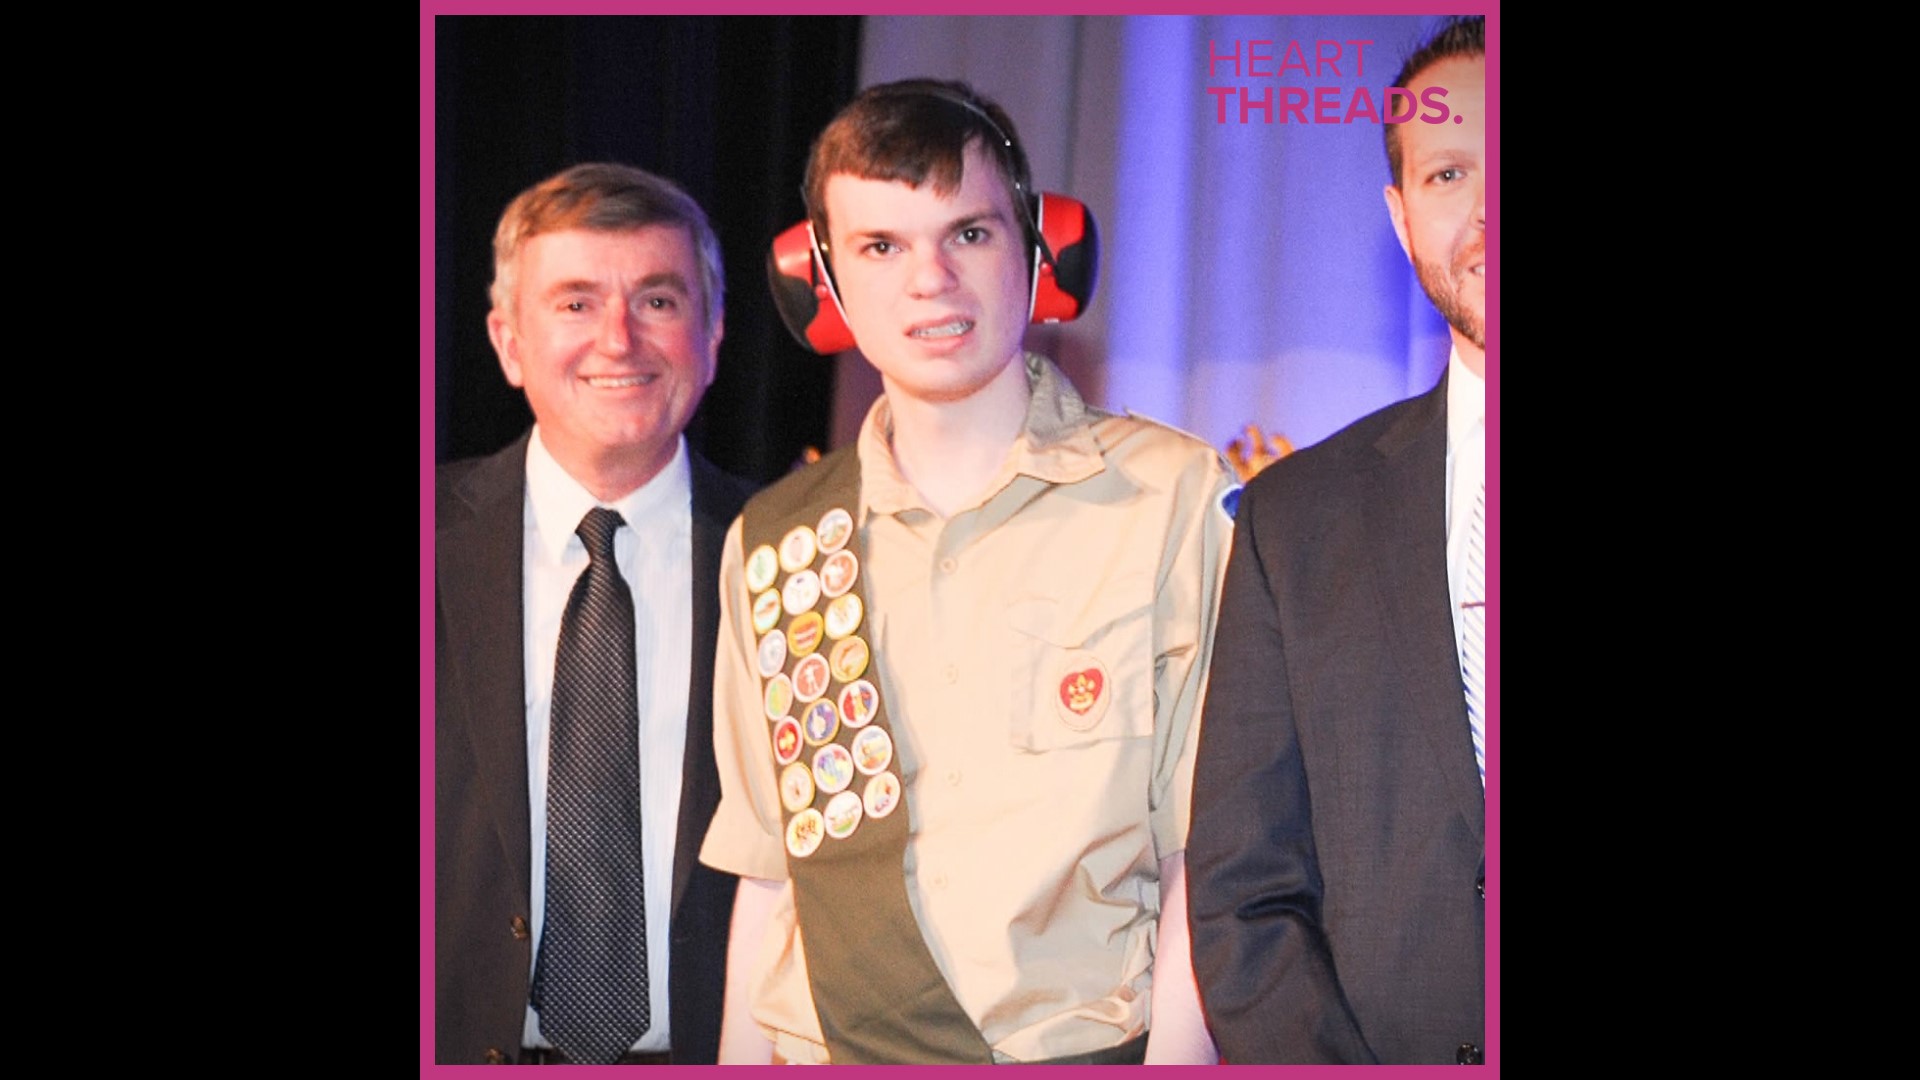 Timmy Hartgate has autism and is mostly non-verbal, but he achieved what only a few Boy Scouts do by earning the rank of Eagle Scout.